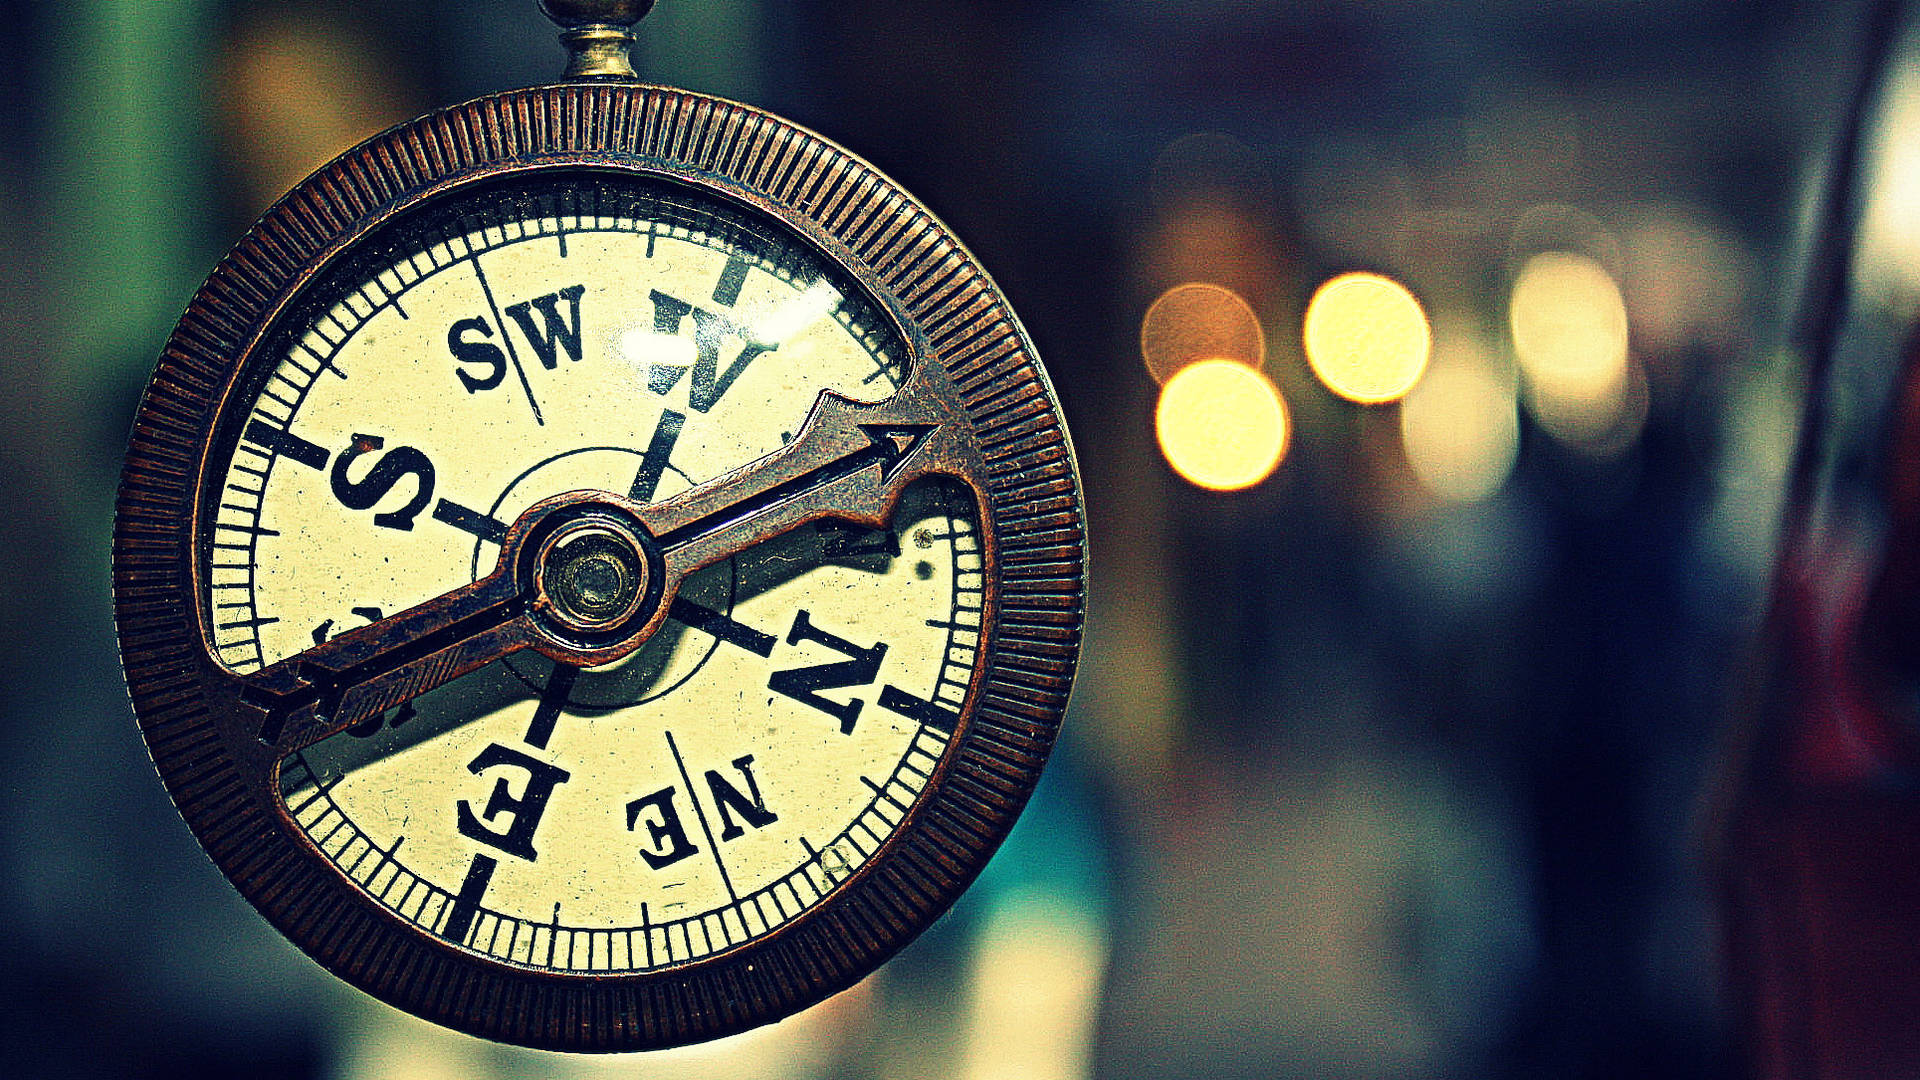 “Find Your Path - A Vintage Compass” Wallpaper